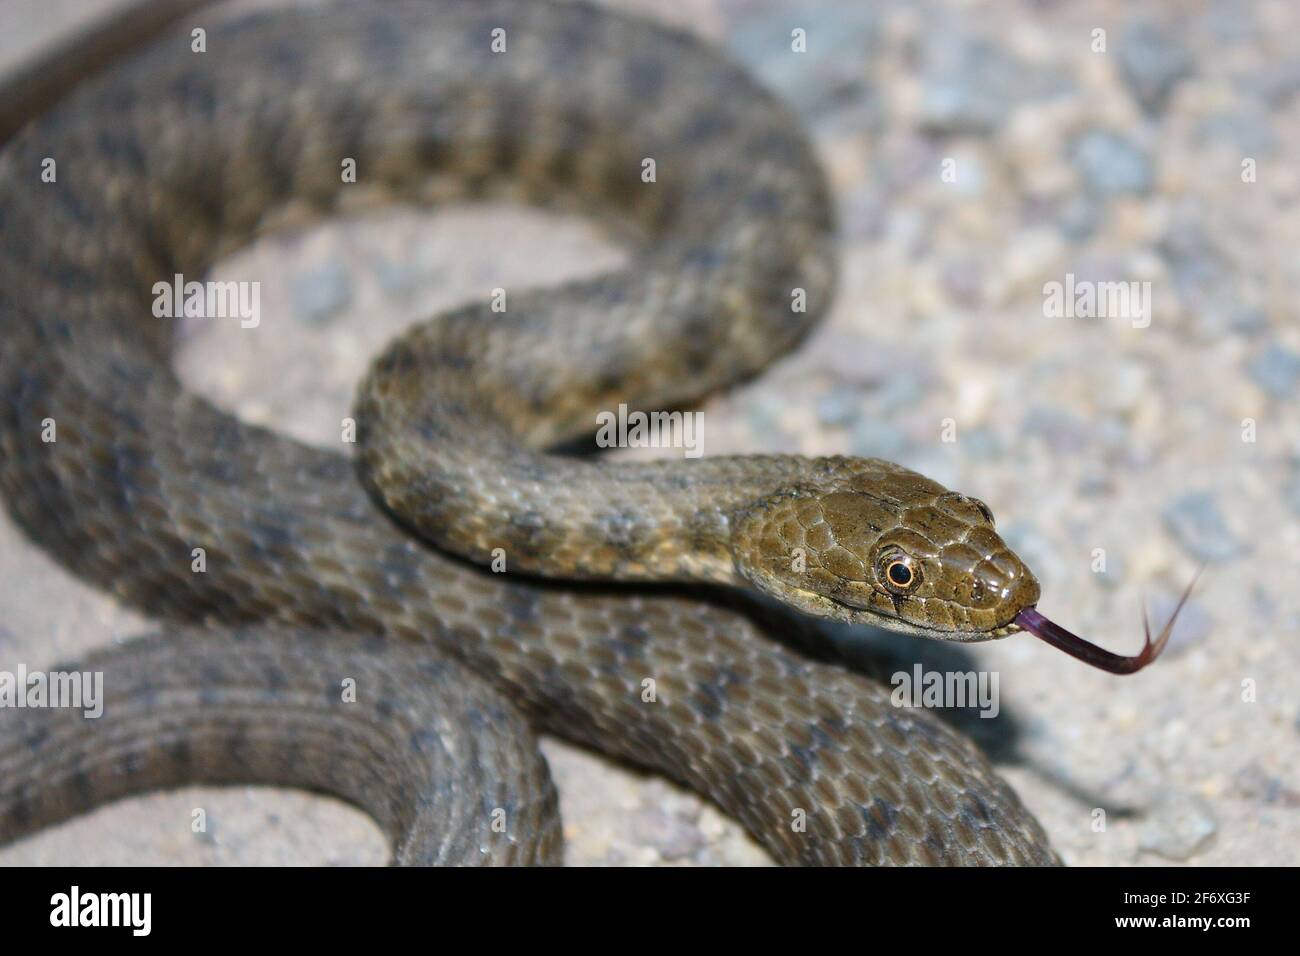 Dice snake (Natrix tessellata) with tongue out Stock Photo